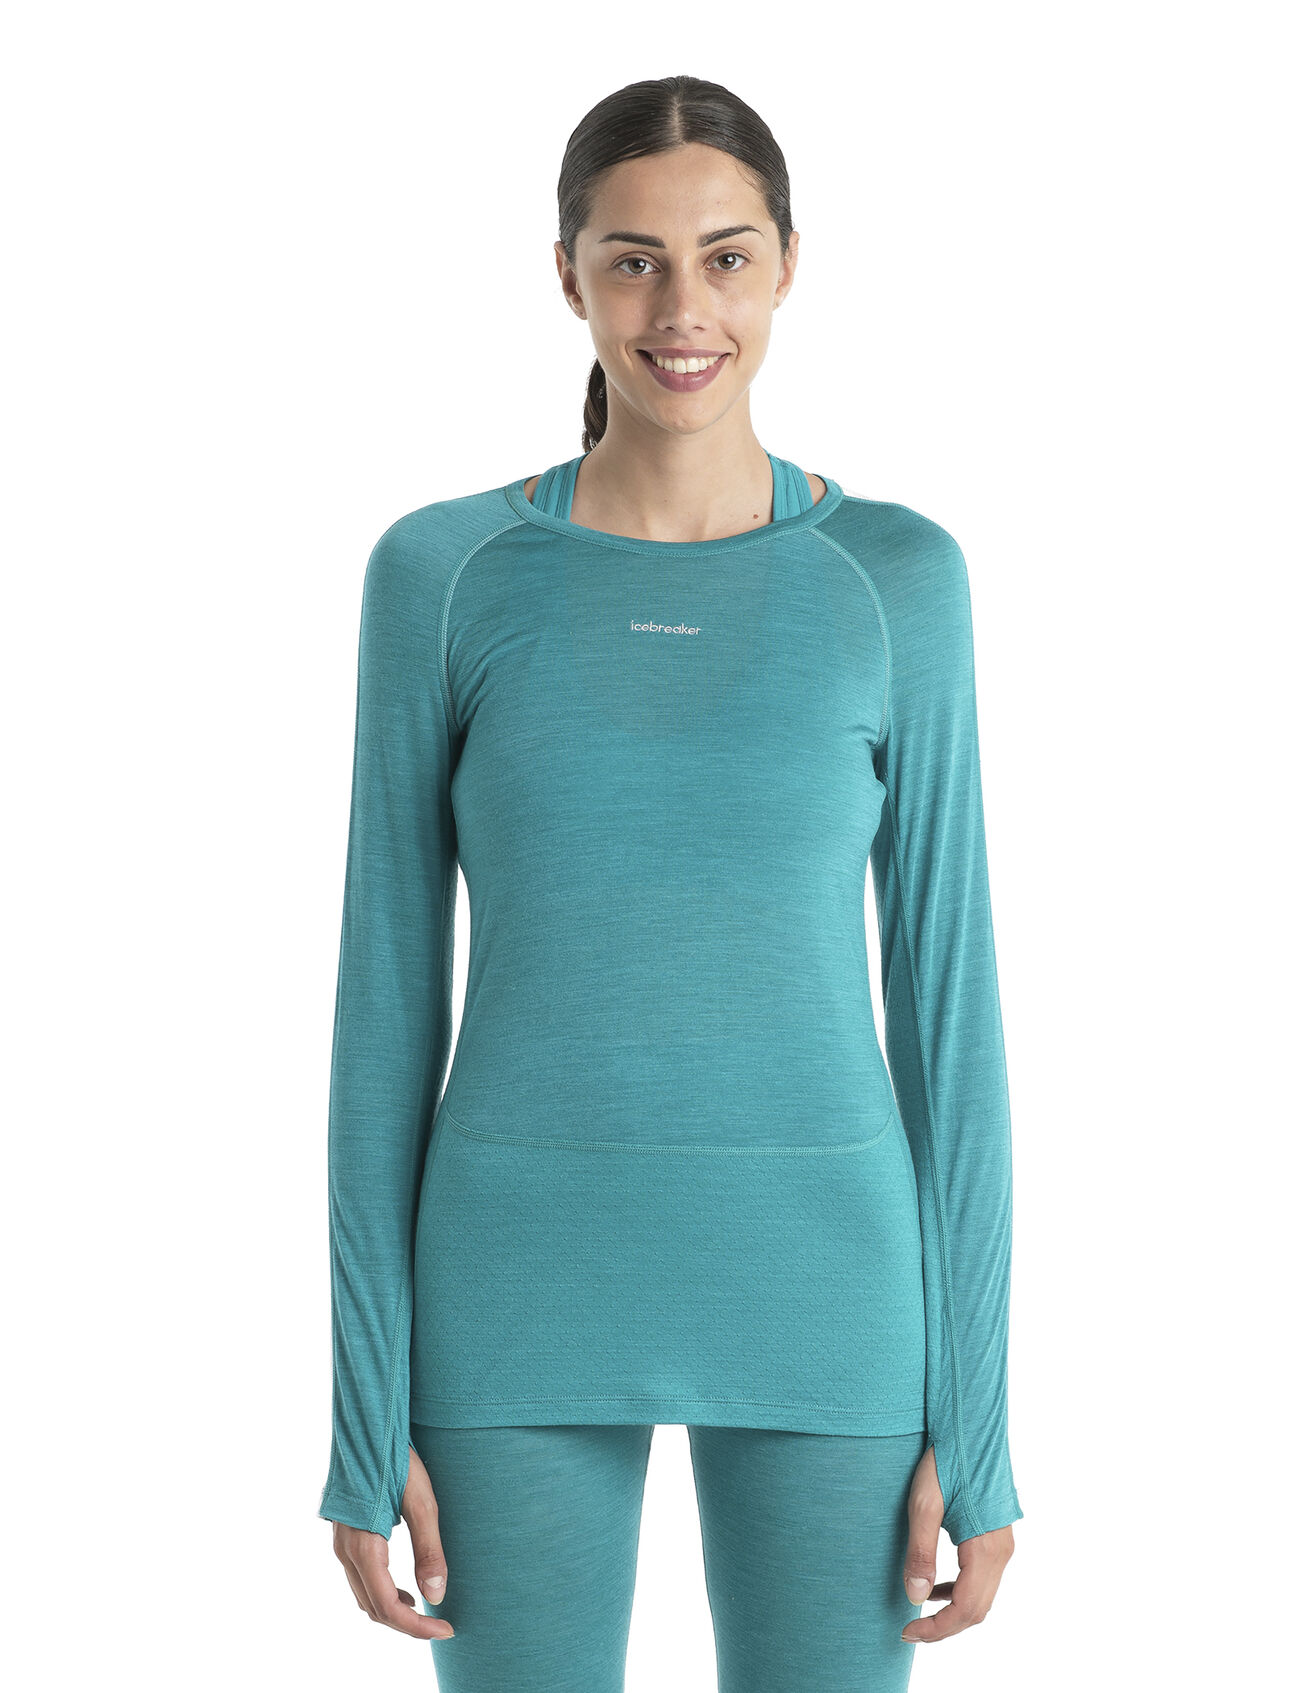 Womens 125 ZoneKnit™ Merino Long Sleeve Crewe Thermal Top An ultralight merino base layer top designed to help regulate body temperature during high-intensity activity, the 125 ZoneKnit™ Long Sleeve Crewe features our jersey Cool-Lite™ fabric for adventure and everyday training.